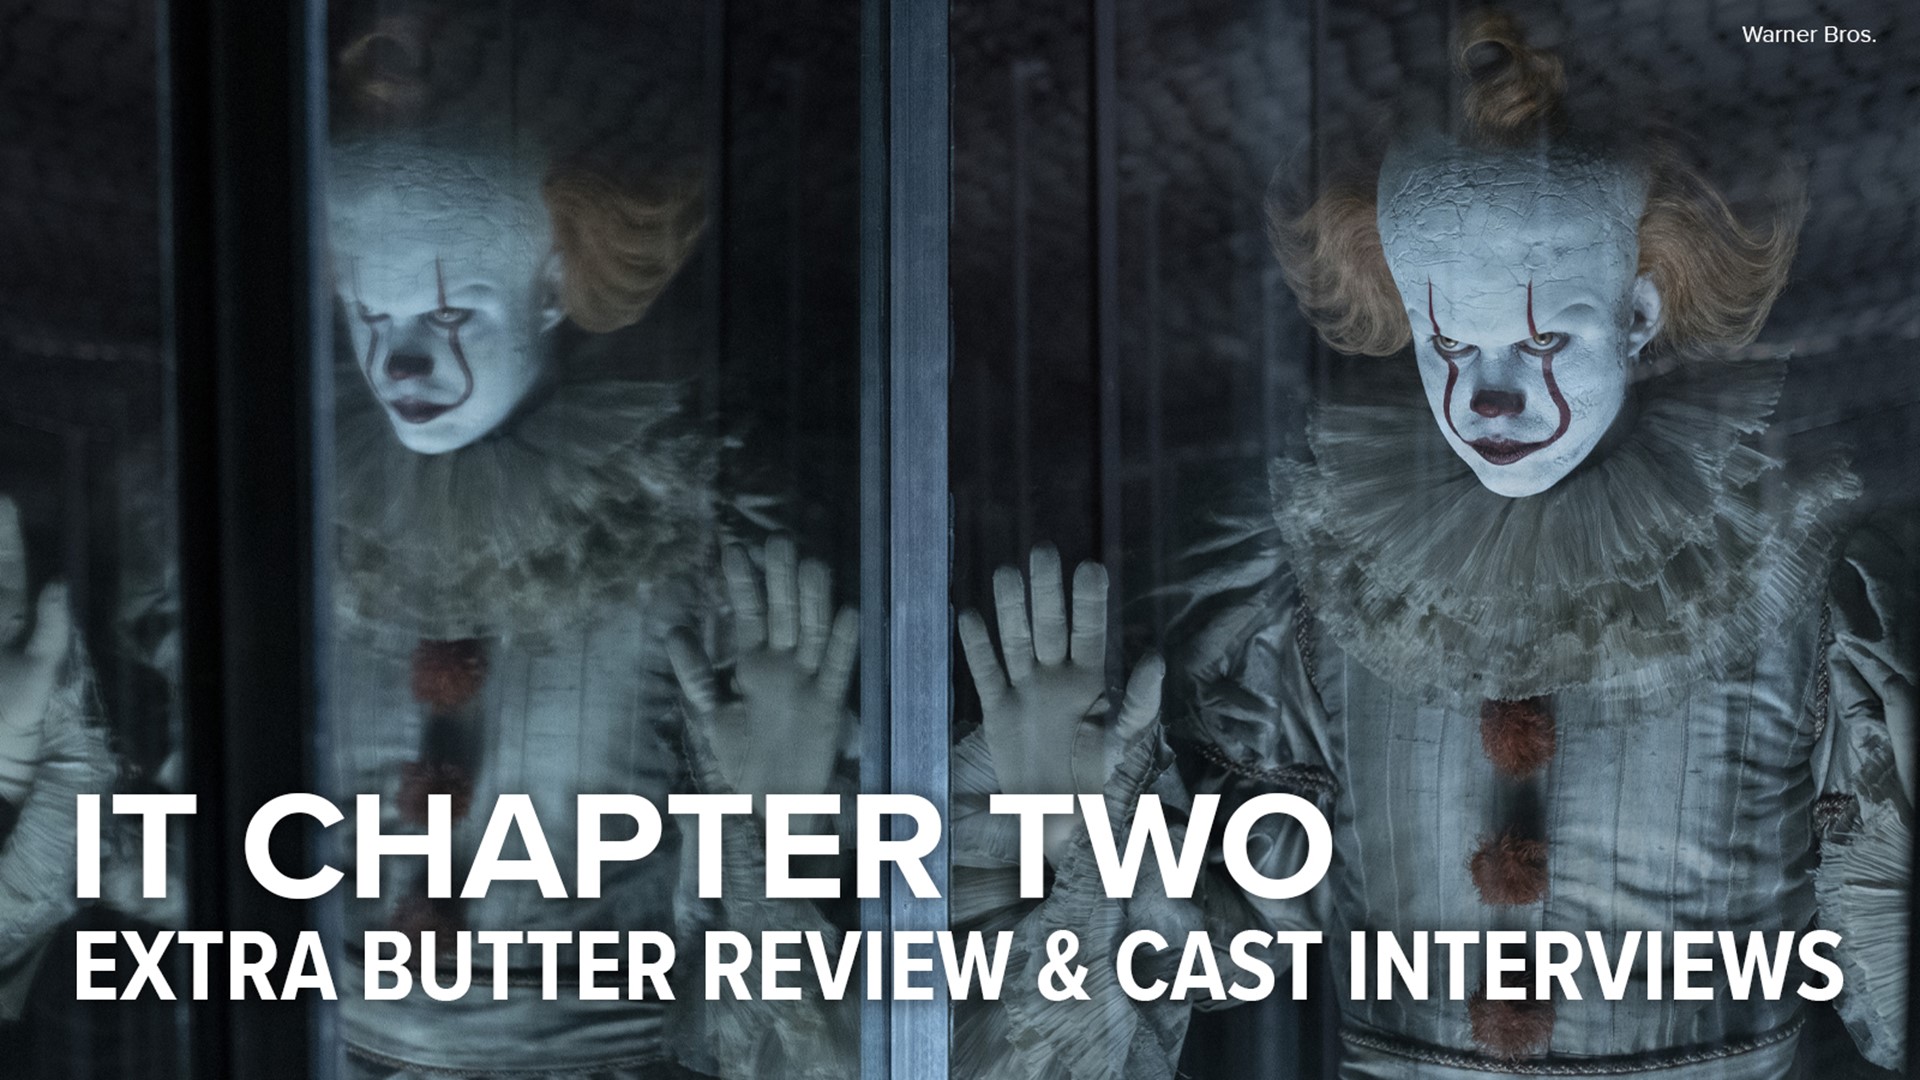 Extra Butter reviews the horror sequel ‘IT Chapter Two’ and interviews the cast of the movie. In a funny interview, Bill Hader doesn’t hide the fact he is tired of talking about the movie, while Finn Wolfhard throws some shade at Bill.